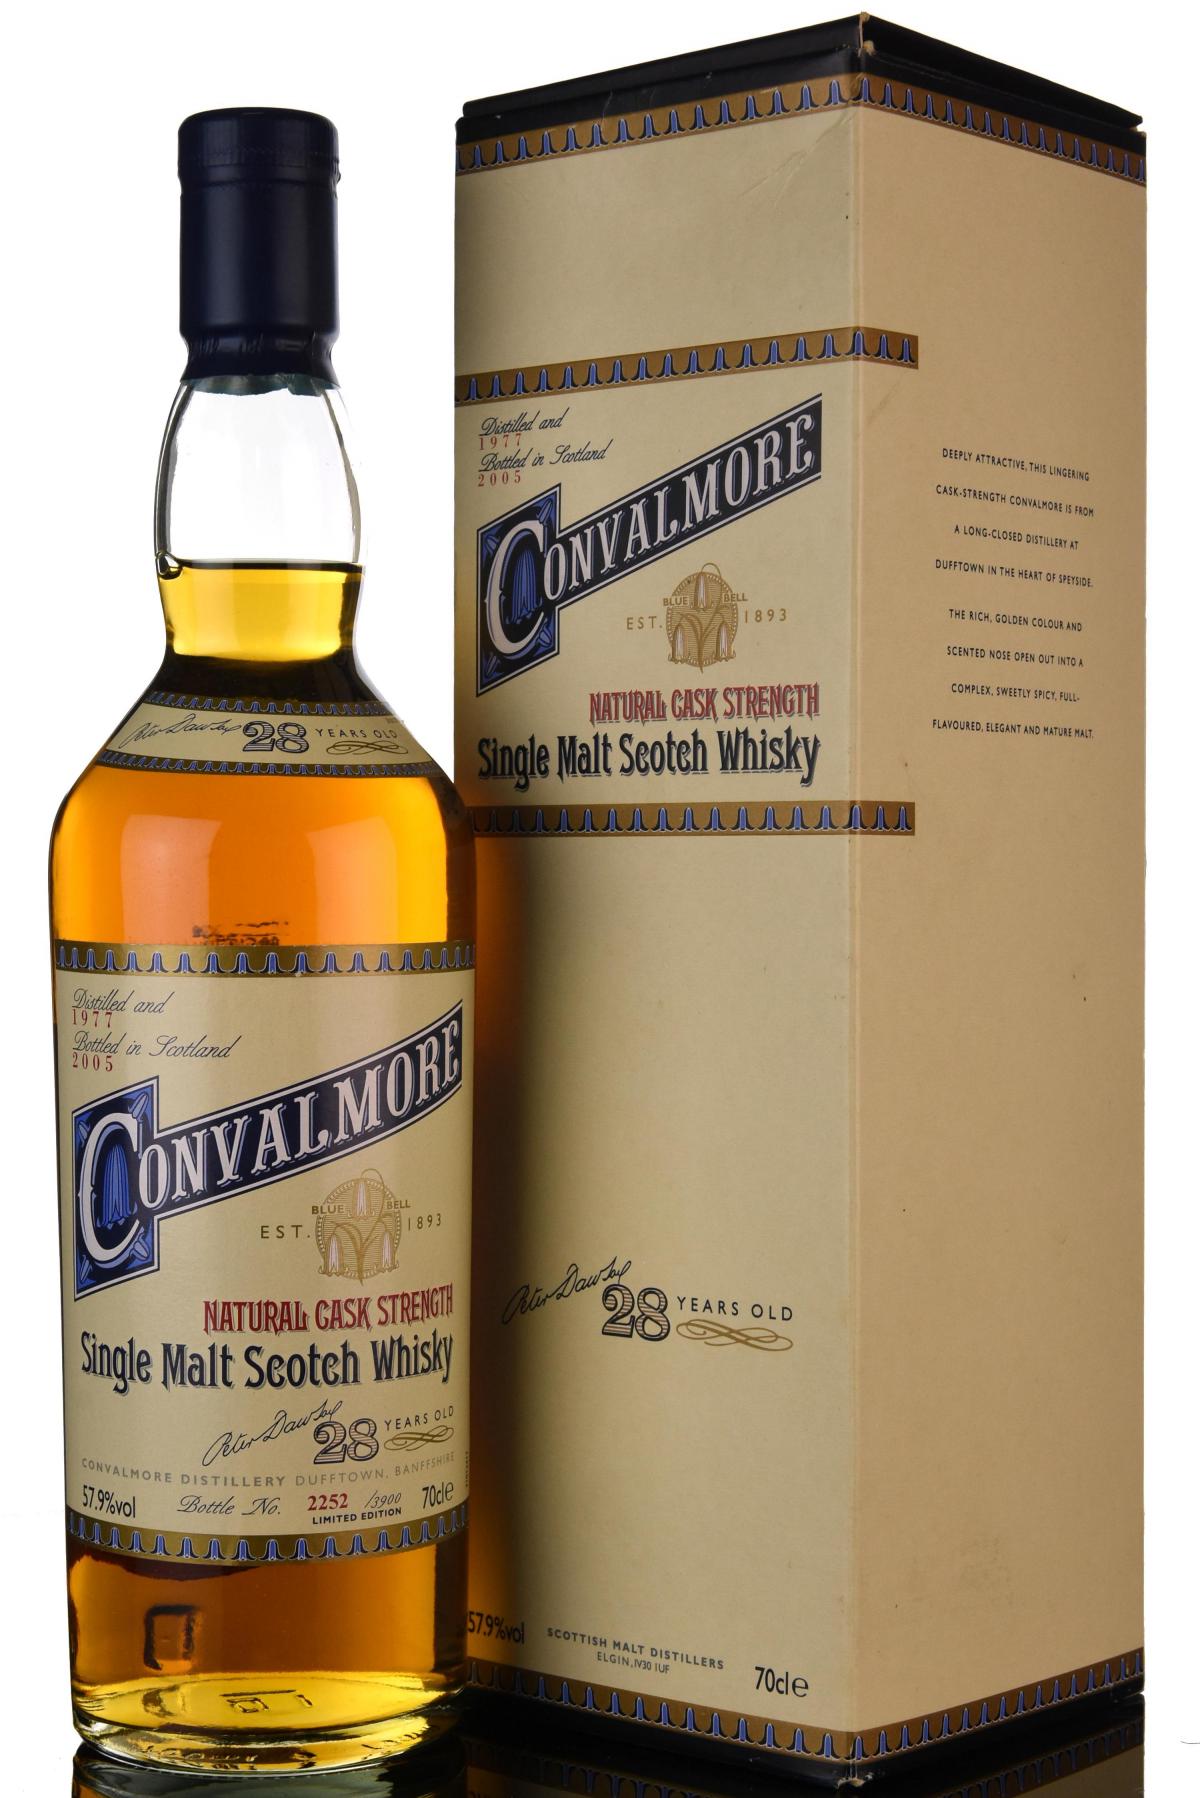 Convalmore 1977-2005 - 28 Year Old